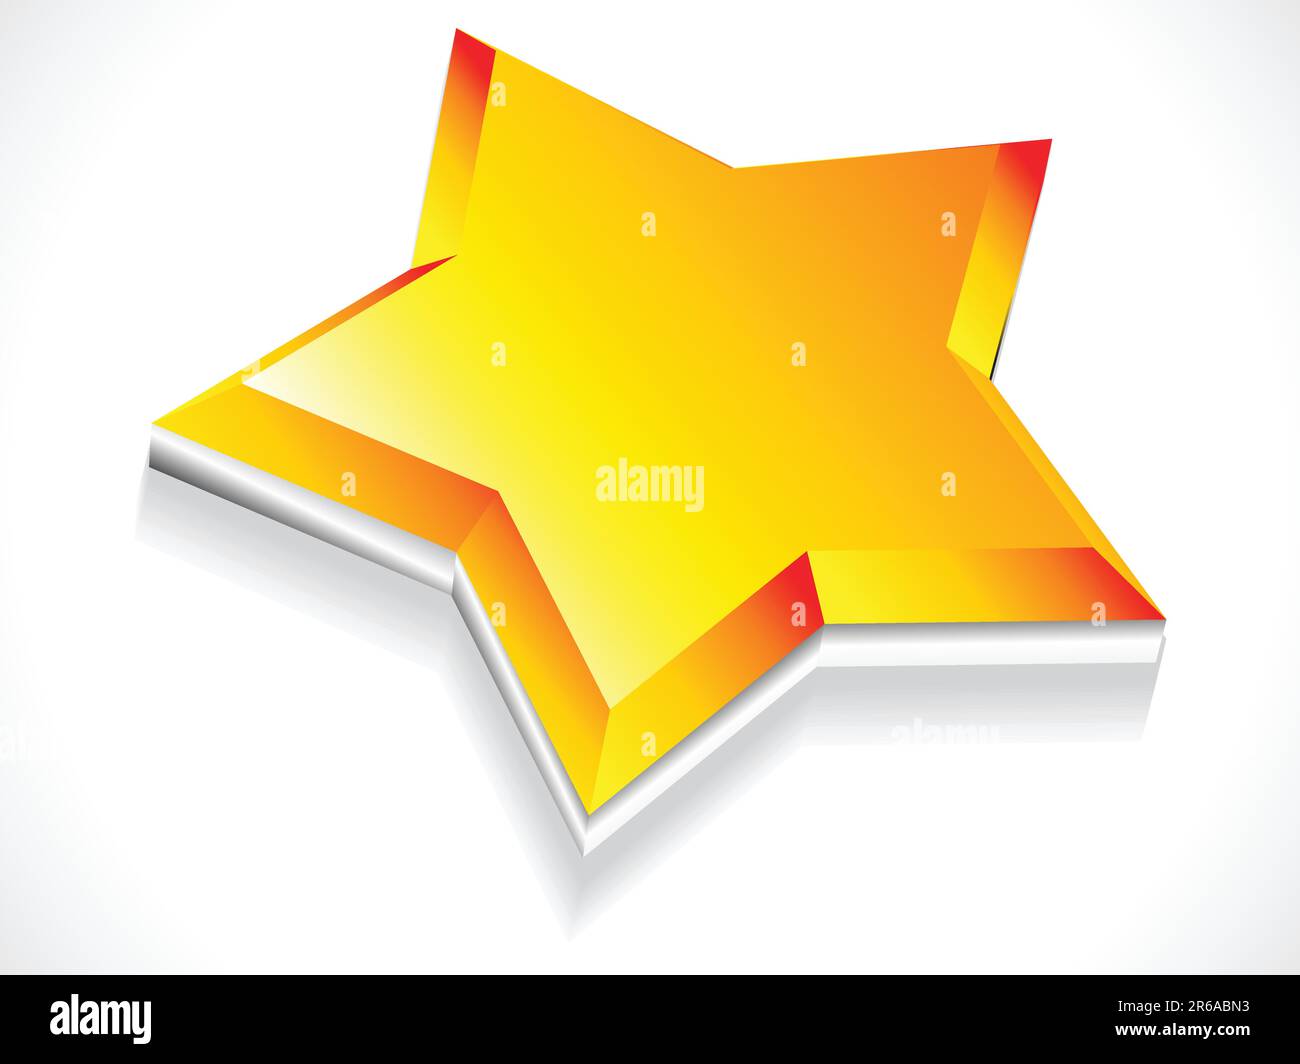 abstract 3d star icon vector illustration Stock Vector